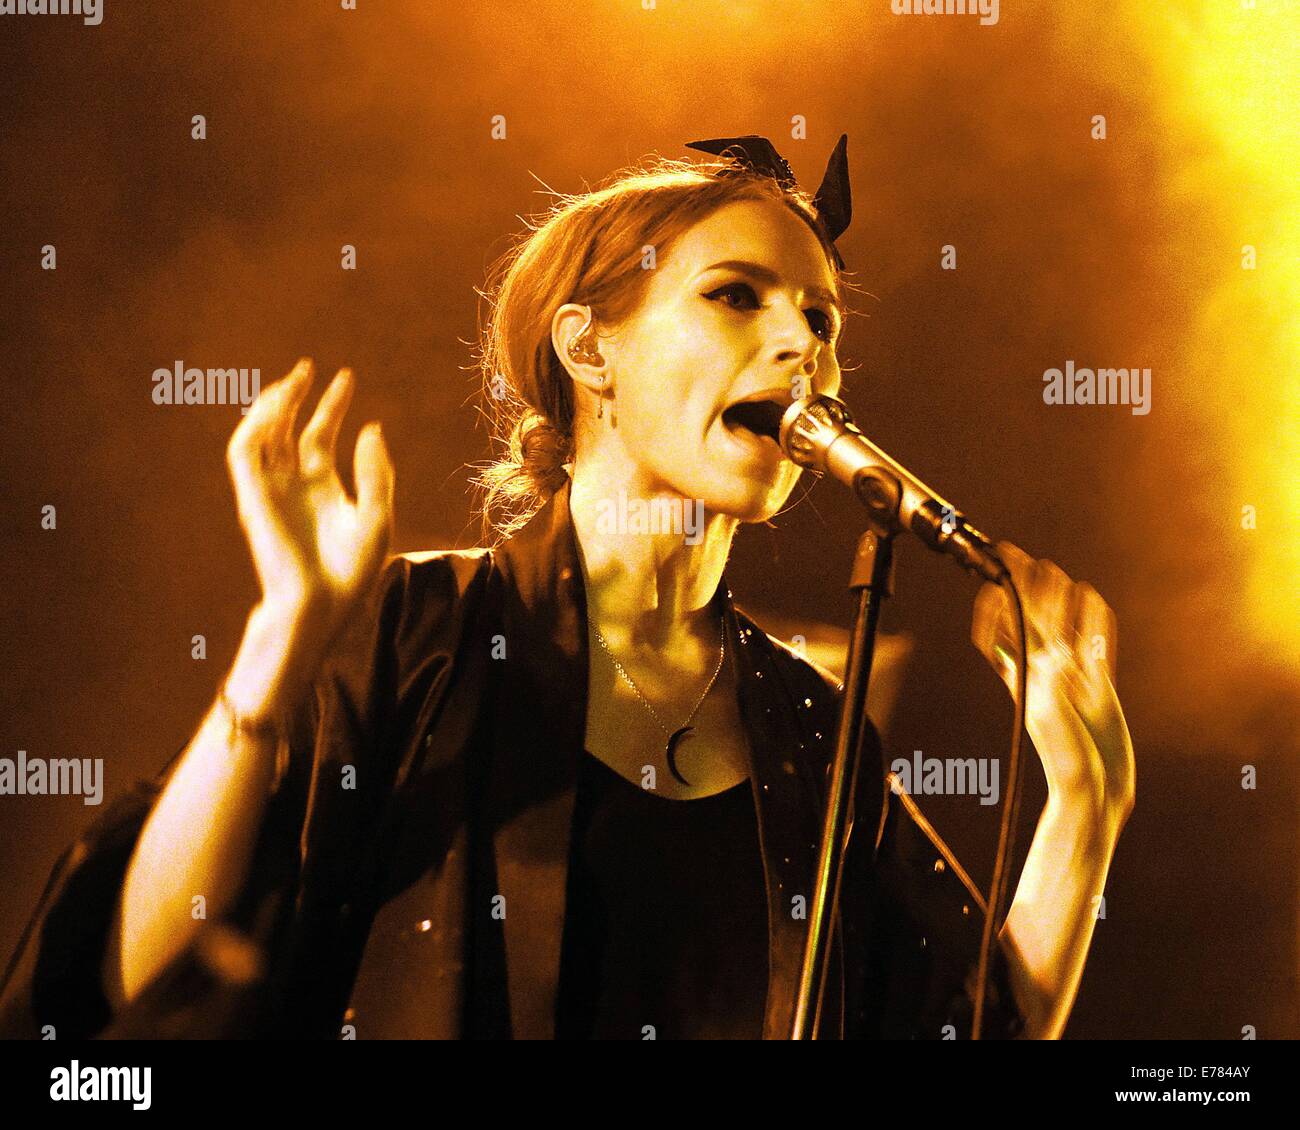 Swedish Singer Nina Persson Formerly Of The Cardigans Performs A Solo Concert At The Button